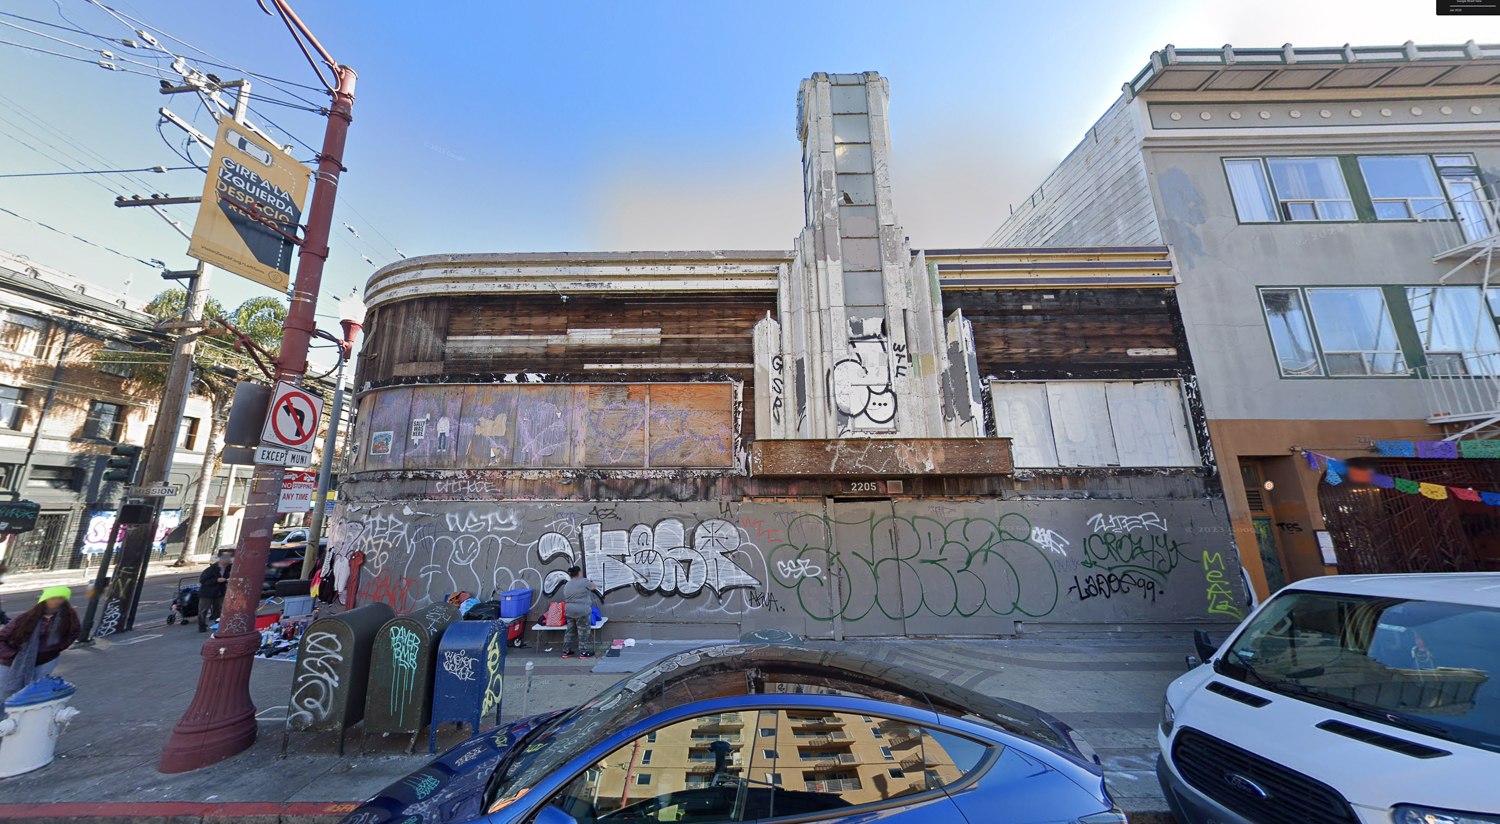 2205 Mission Street existing condition, image via Google Street View